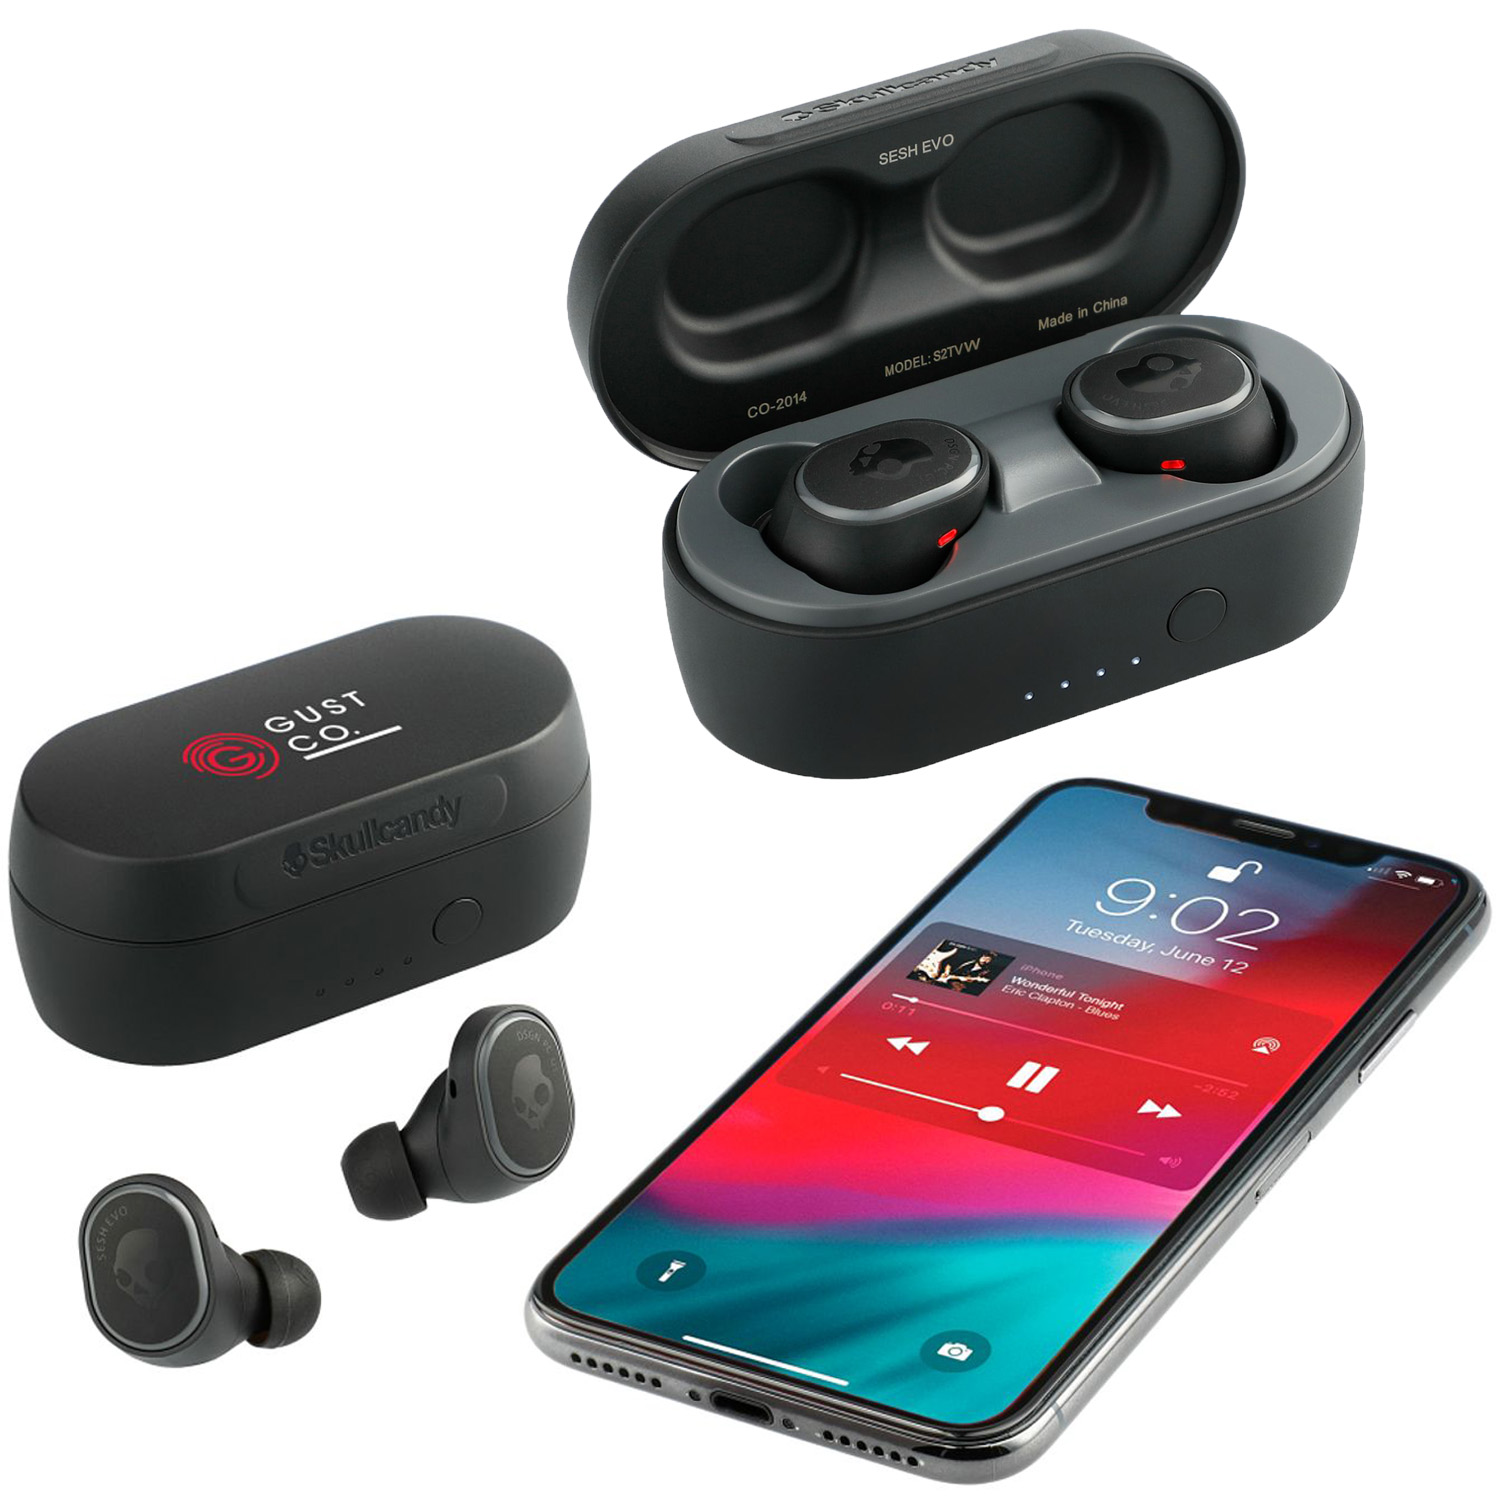 Skullcandy Sesh Evo Bluetooth Earbuds with Charging Case